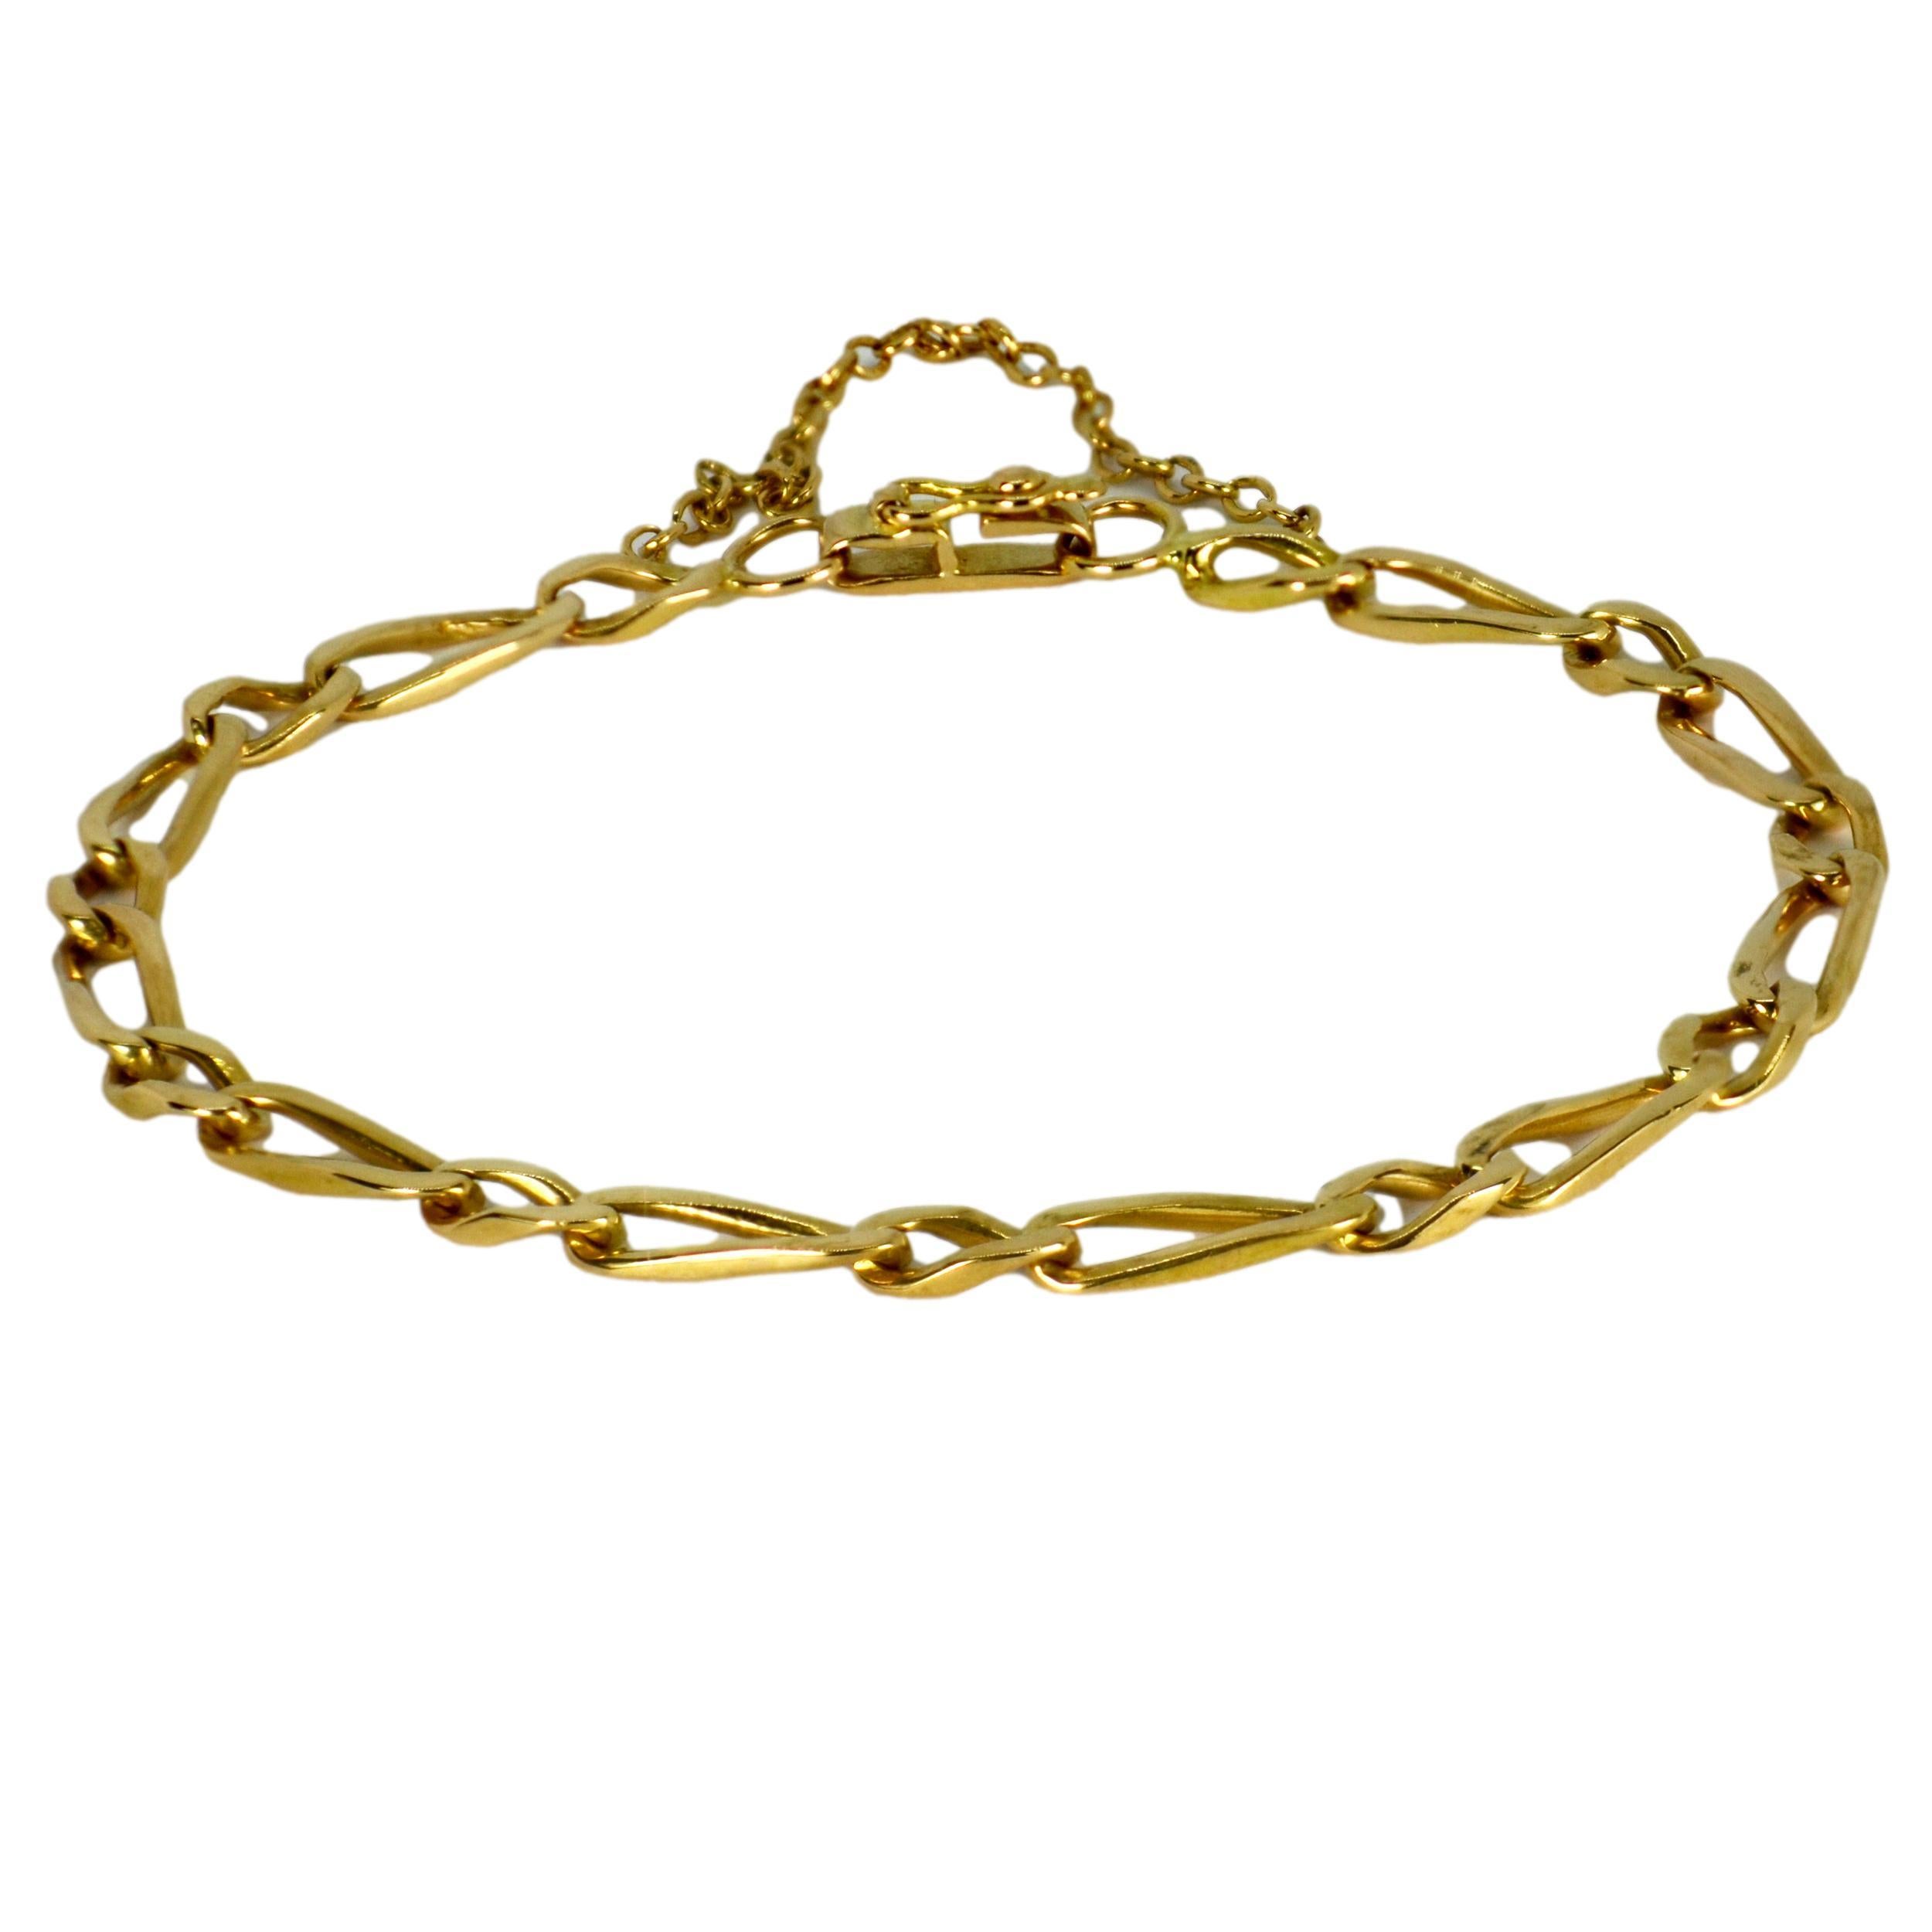 An 18 karat (18K) yellow gold bracelet designed as a figaro link chain with twisted curb links. Unmarked but tested as 18 karat gold. 7.25” long.

Dimensions: 18.5 x 0.5 cm
Weight: 9.84 grams
